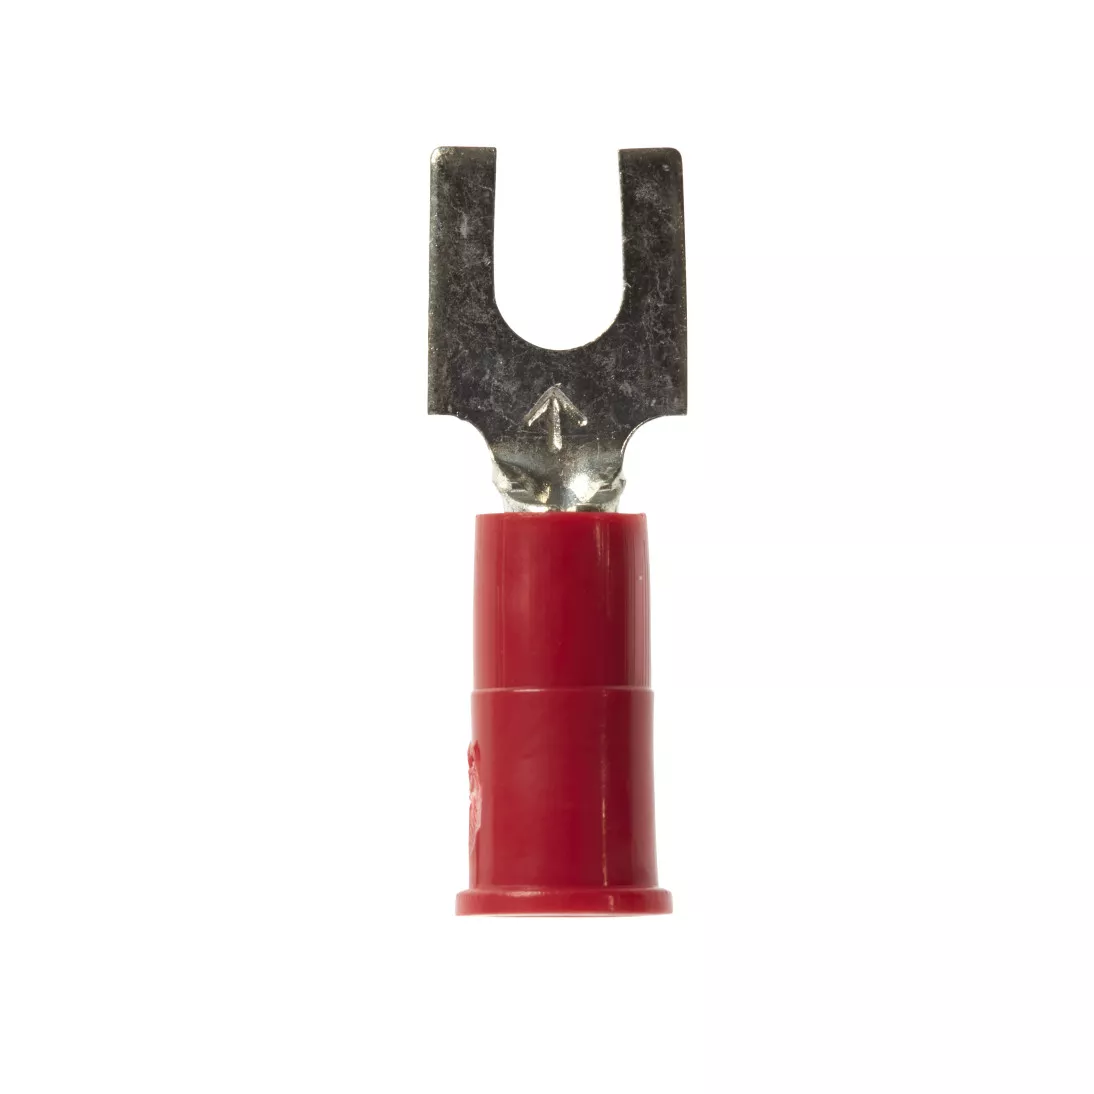 3M™ Highland™ BFV18-8Q Vinyl-Insulated Butted Seam Block Fork Terminal,
8 Stud, 22 - 18 AWG, Red, 25 per bag, 10 Bags/Case